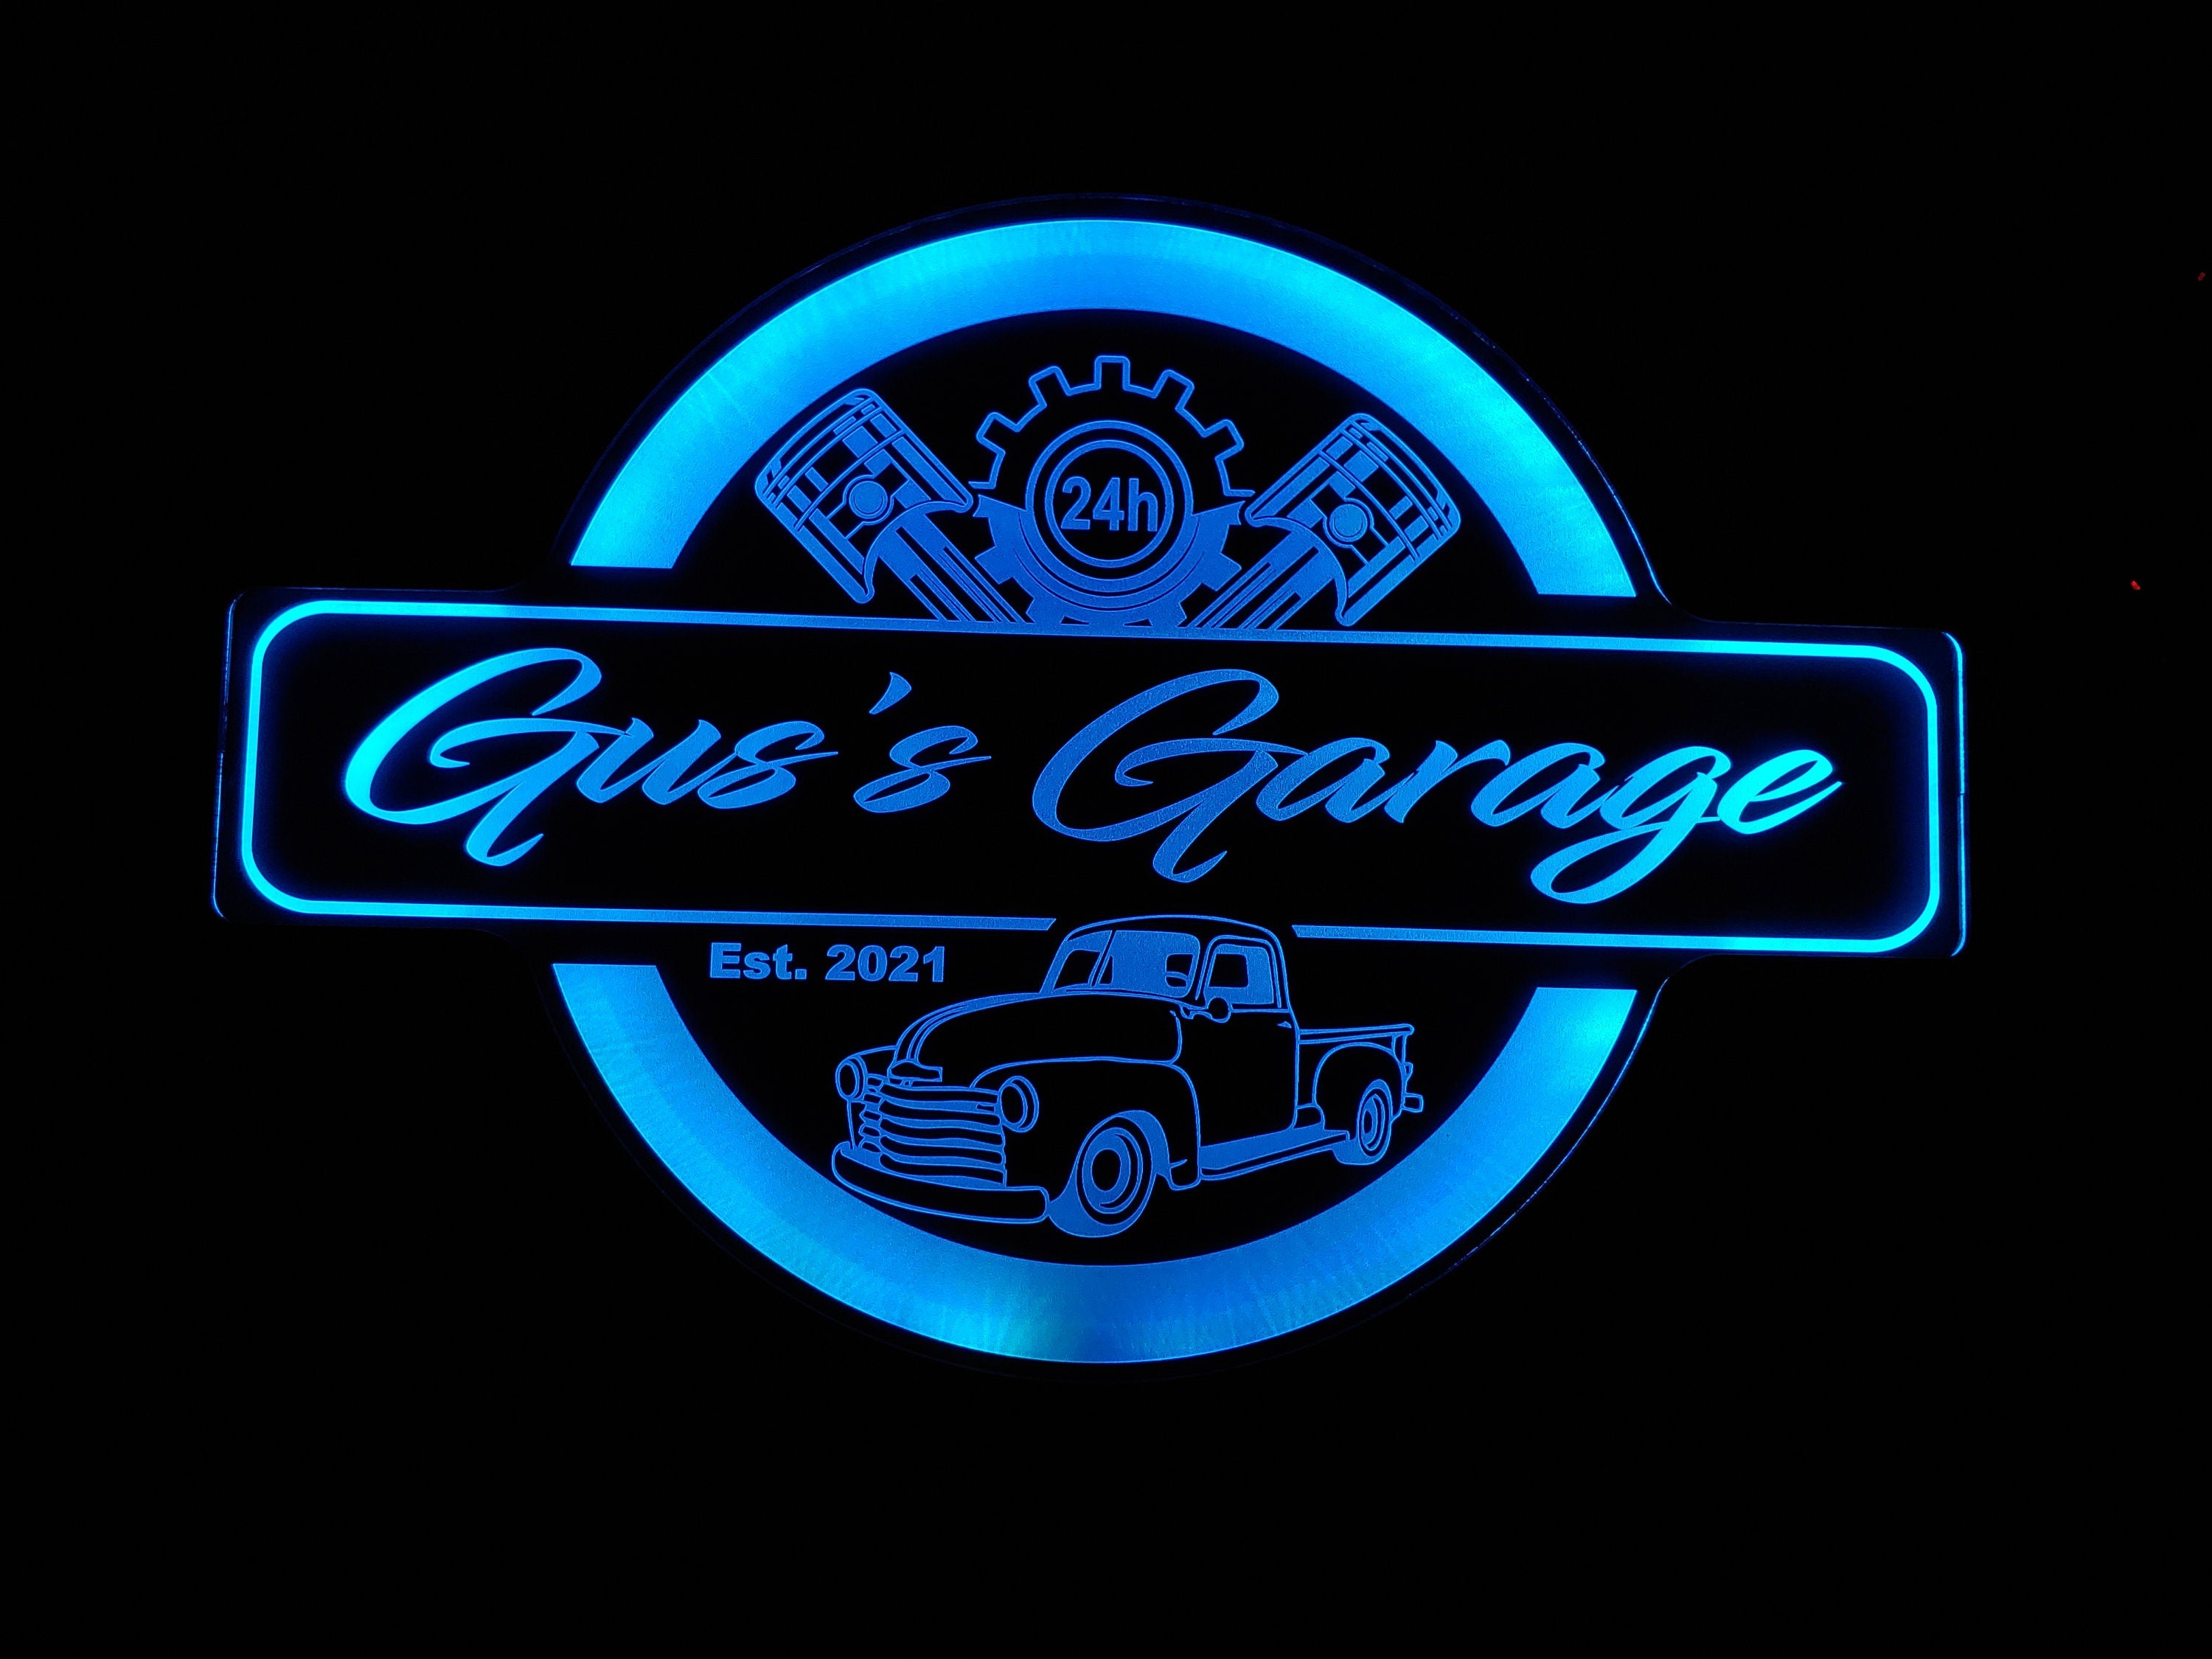 Custom Sign with Cars - Trucks - Tractors - Color Changing Acrylic - Led Night Light - Neon-Like - 4 Sizes - Free Shipping